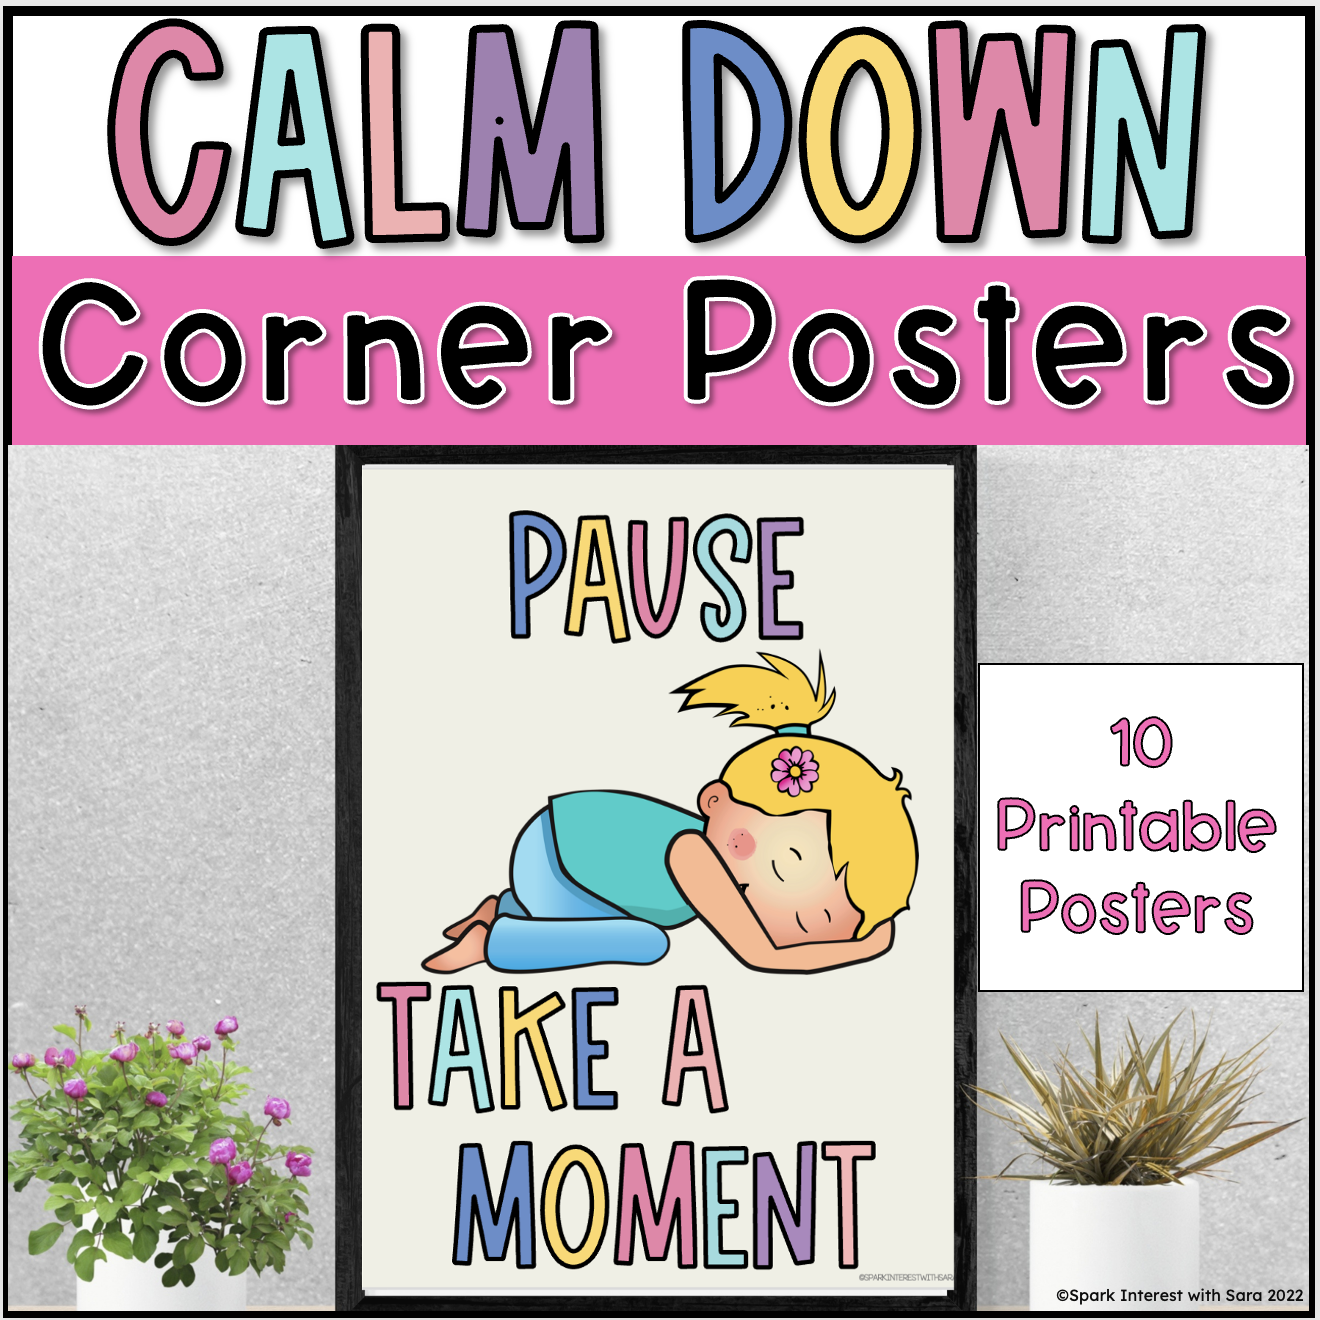 Calm Down Corner Posters Made By Teachers